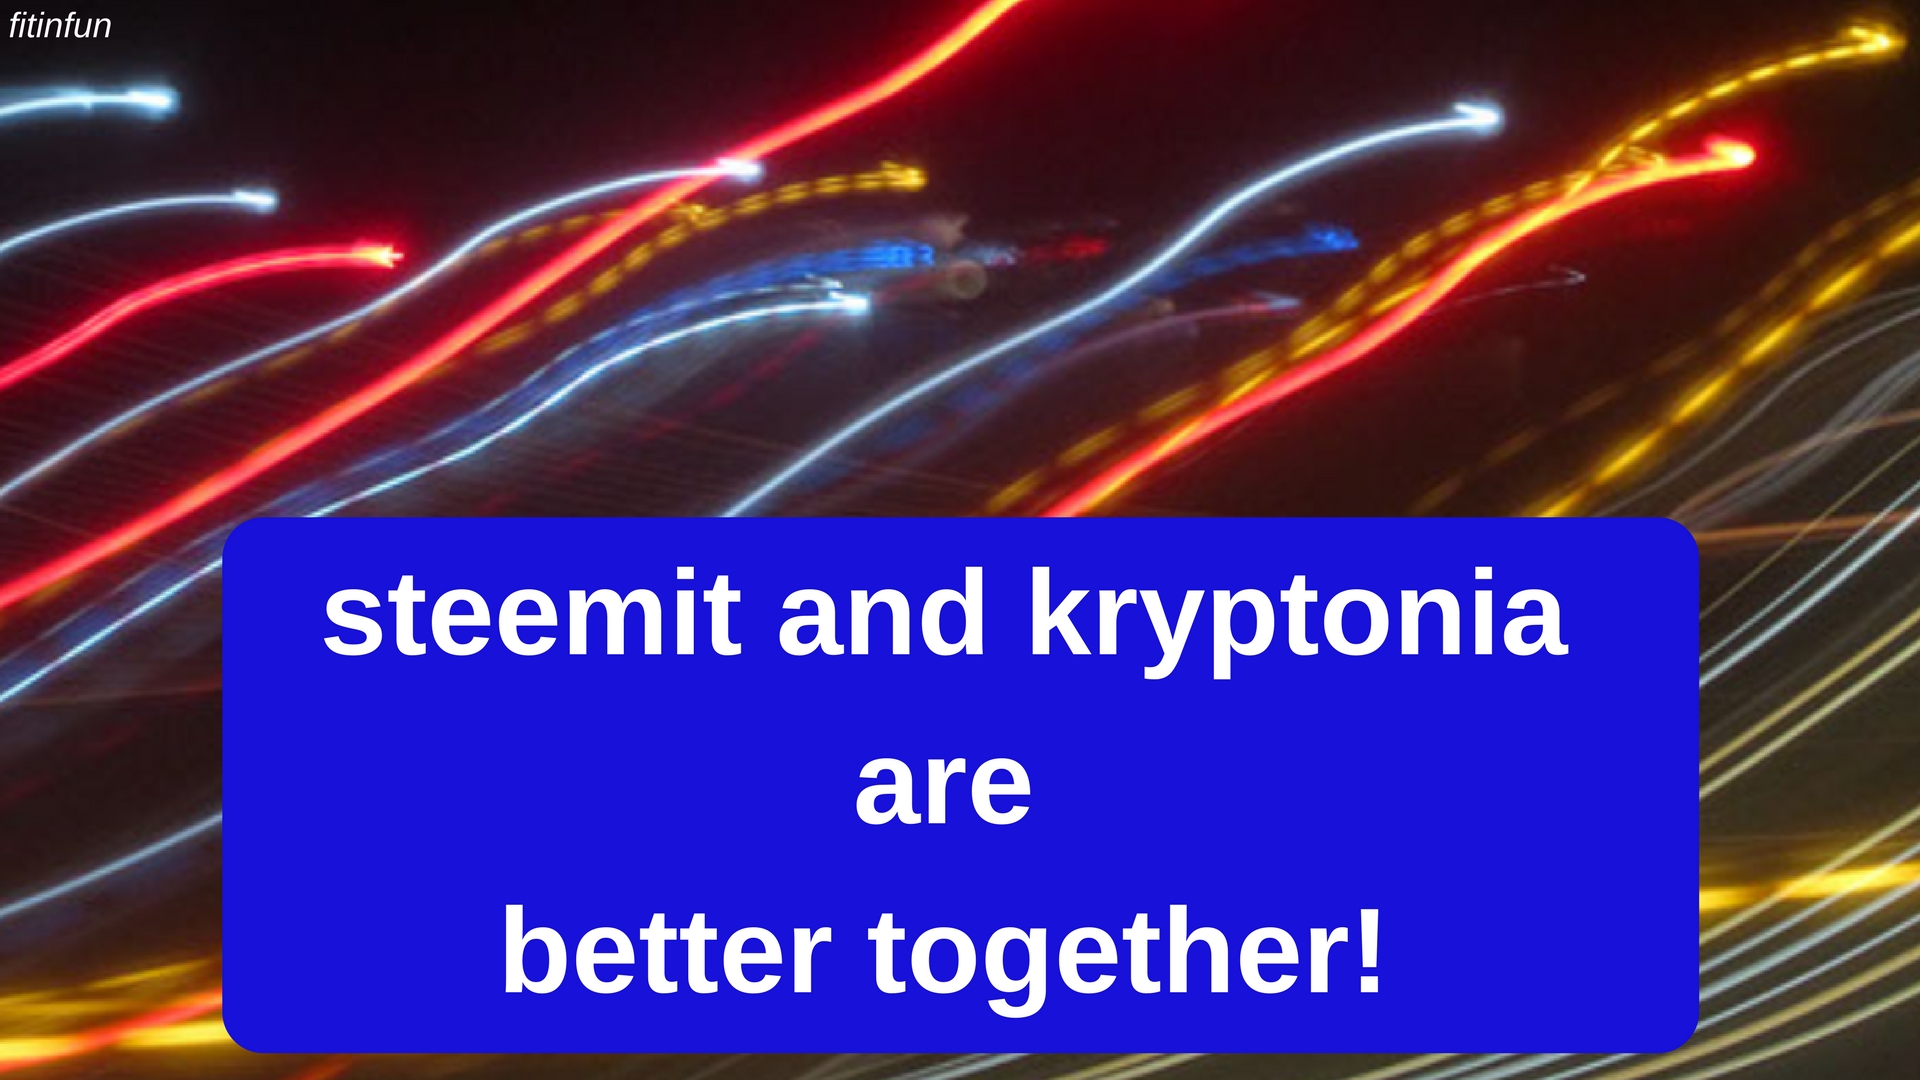 steemit and kryptonia are better together fitinfun.jpg